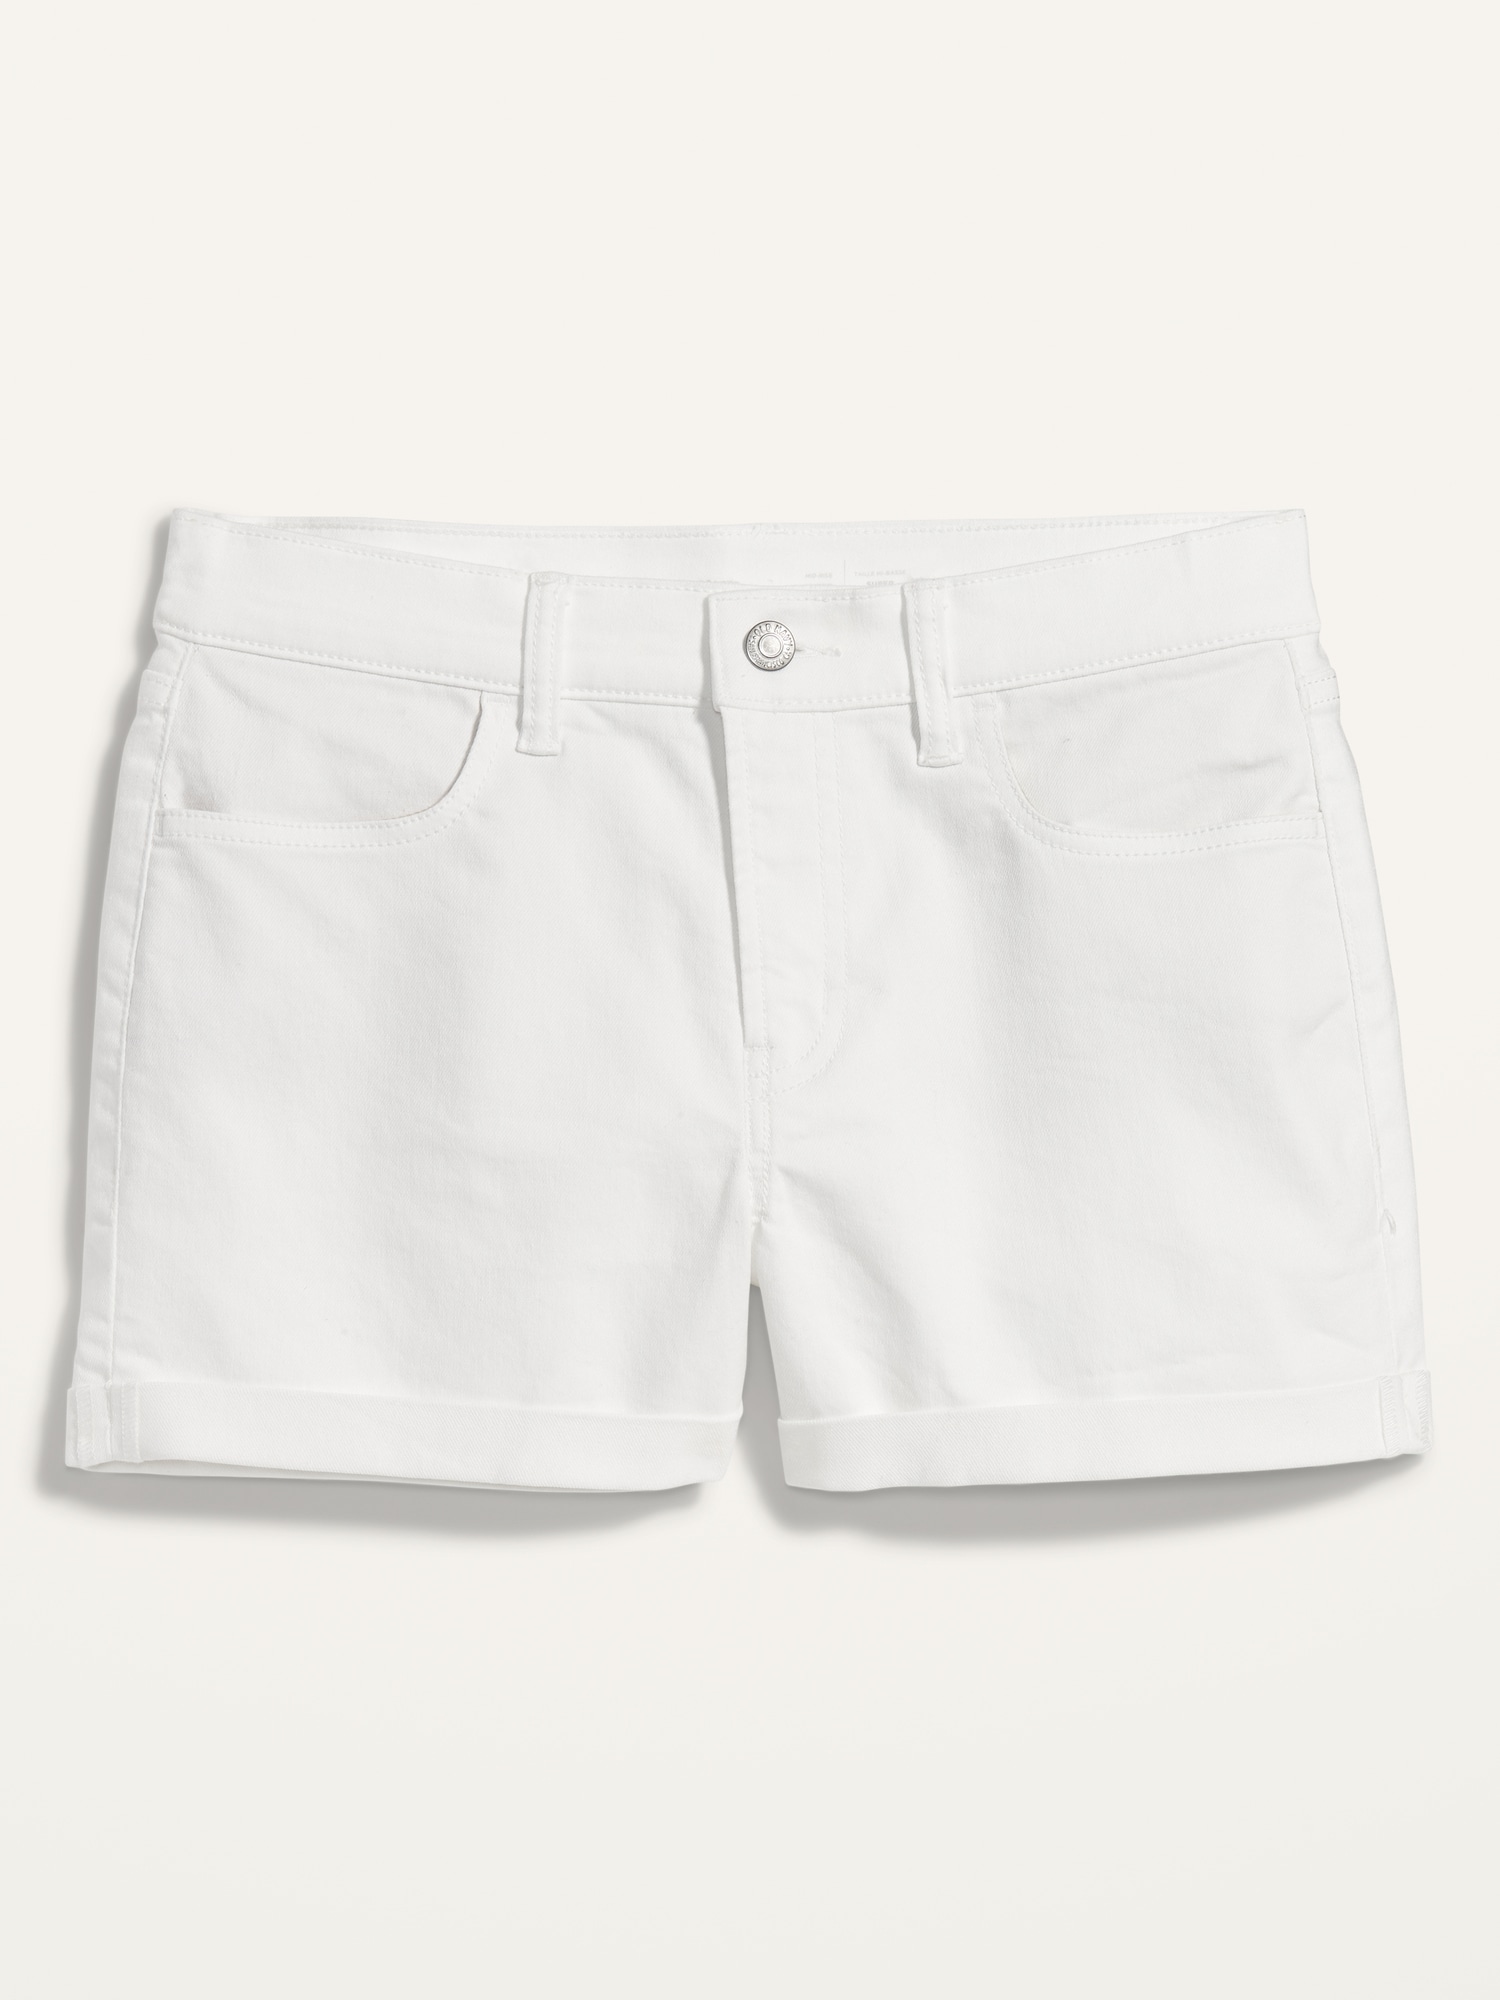 Mid-Rise Wow White Jean Shorts for Women -- 3-inch inseam